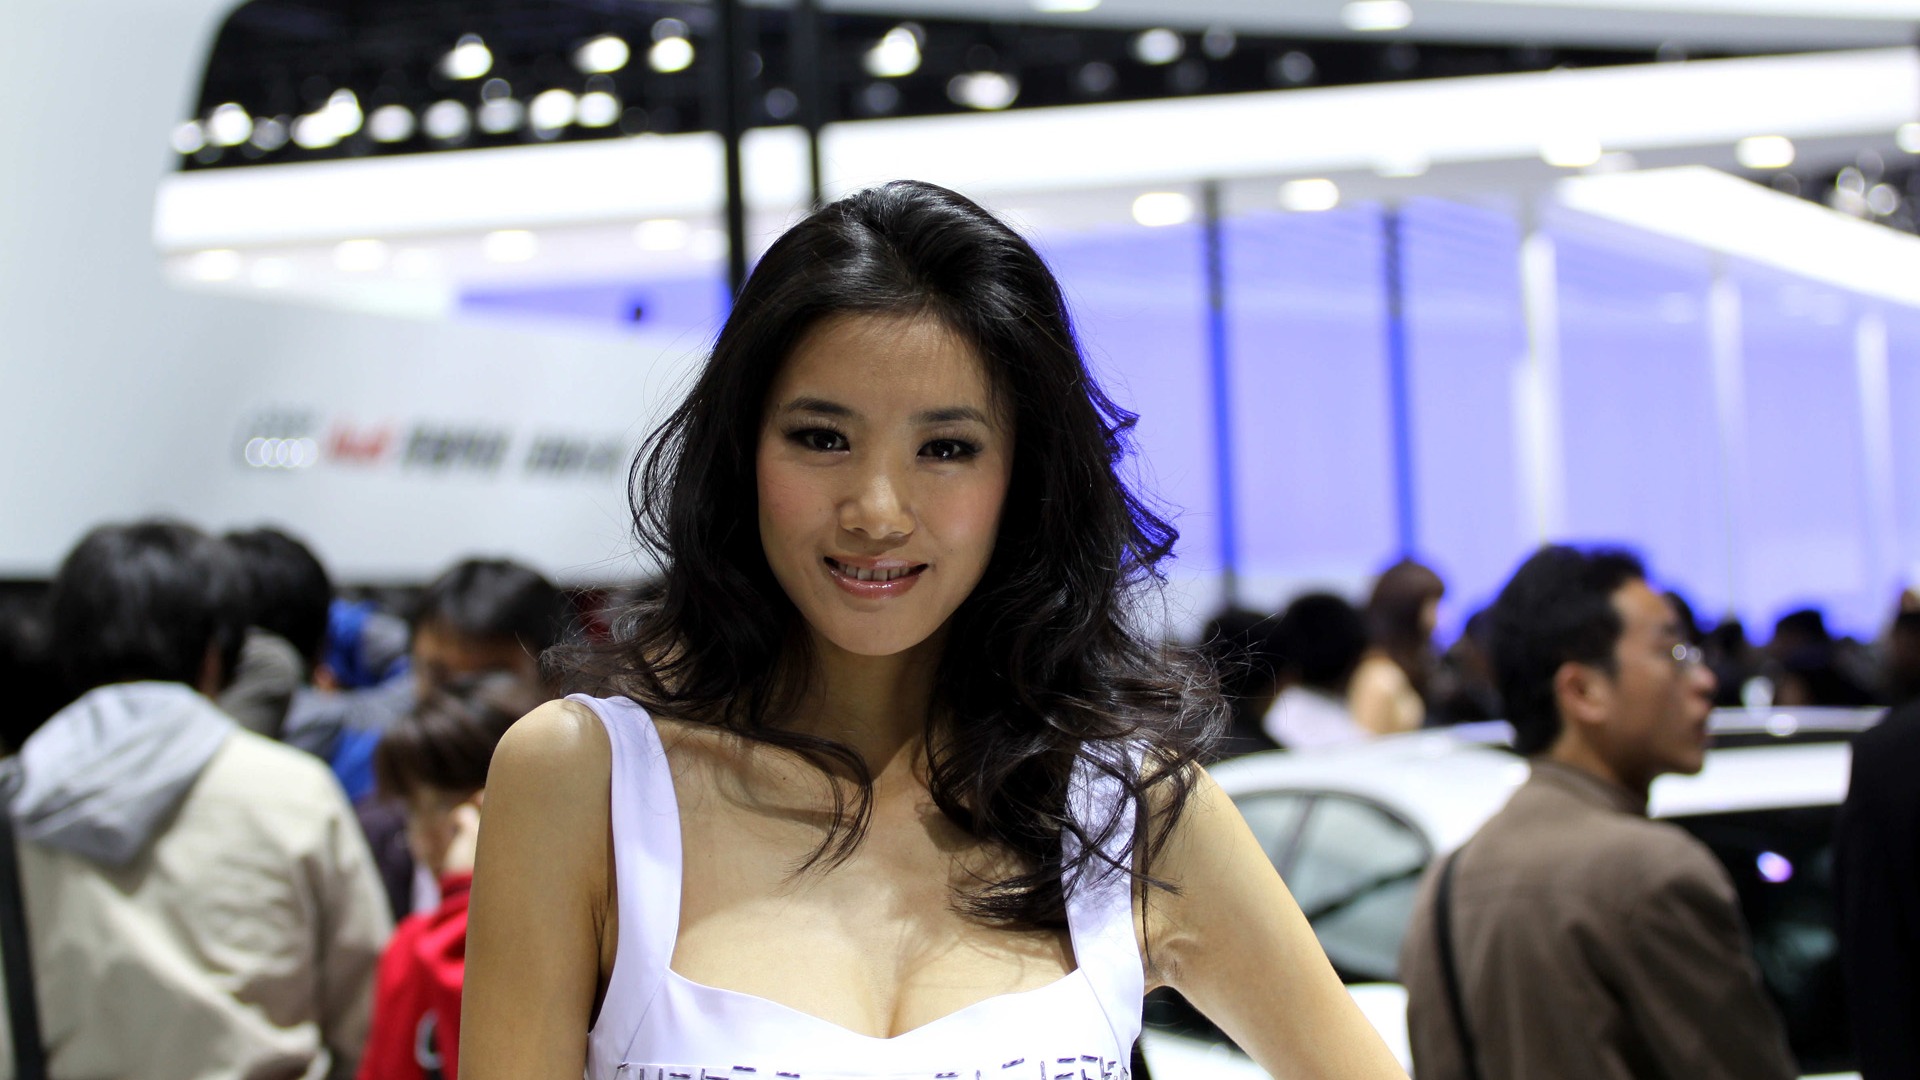 2010 Beijing Auto Show car models Collection (2) #4 - 1920x1080